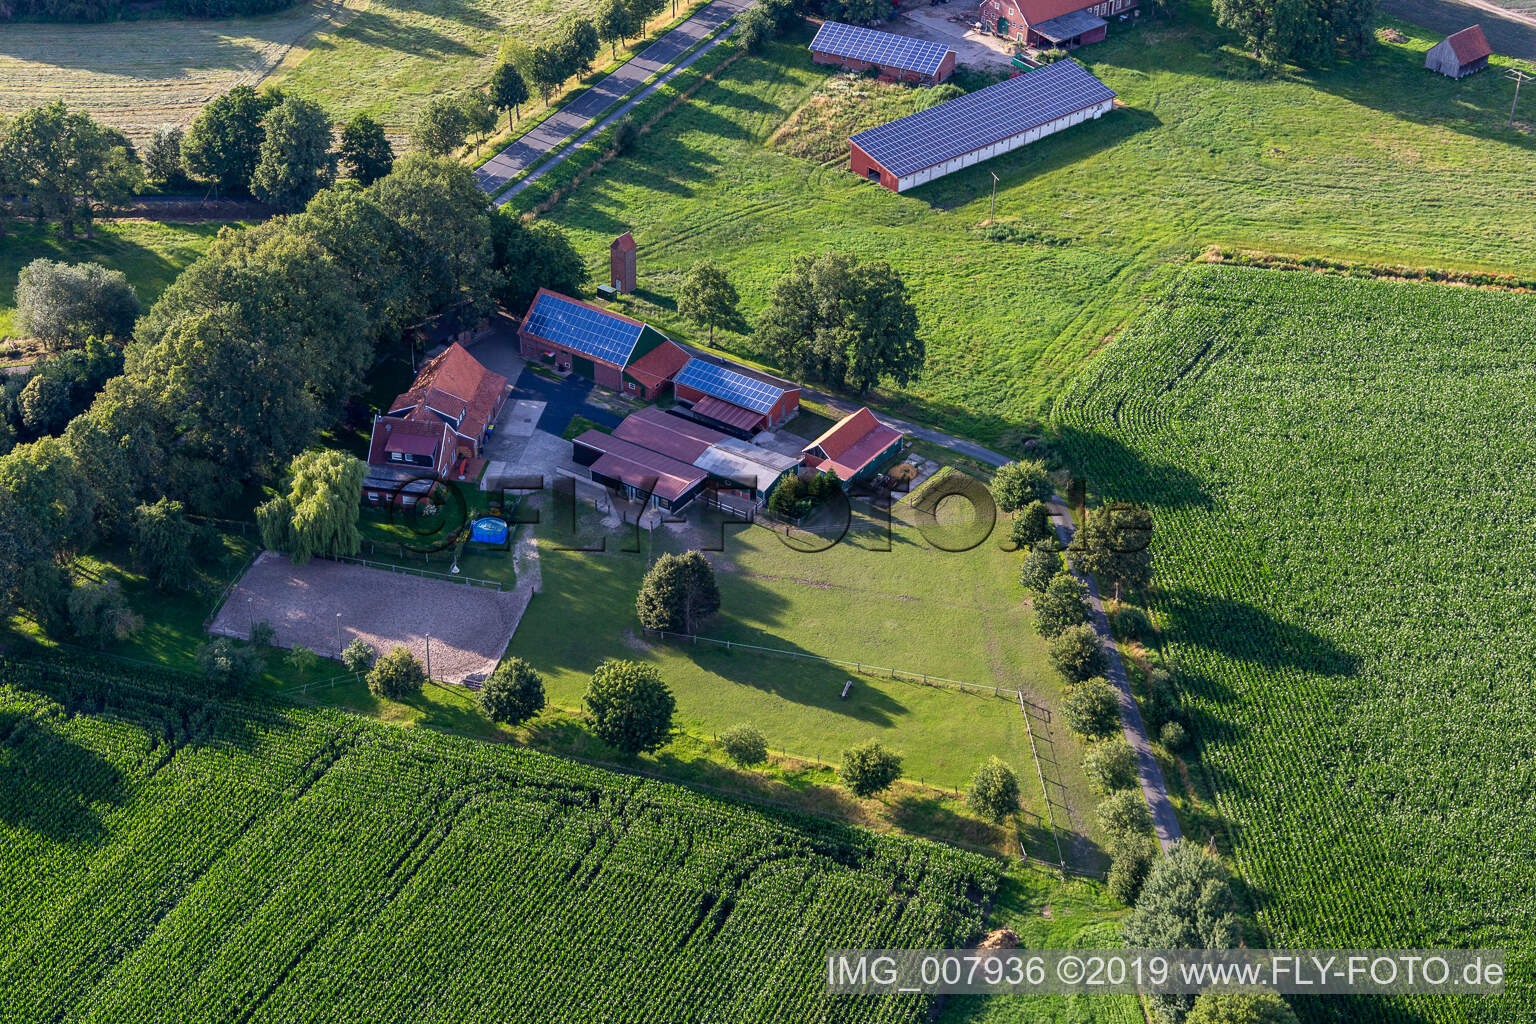 Drone image of Gescher in the state North Rhine-Westphalia, Germany